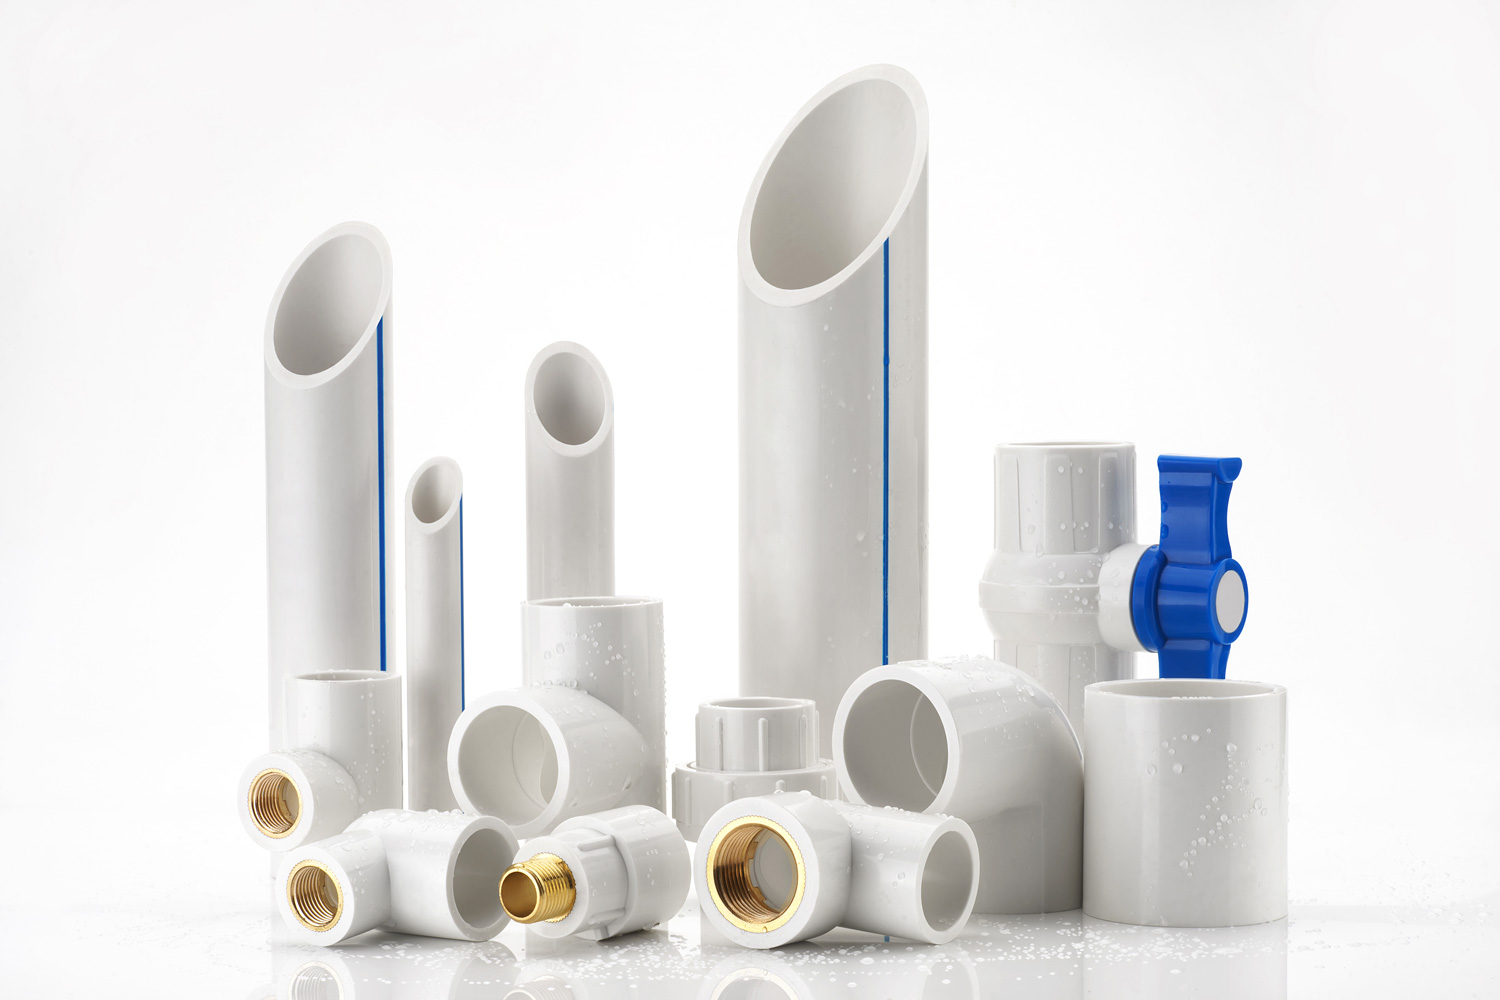 UPVC CPVC Fittings for polypropylene pipes. Elements for pipelines. plastic piping elements. They are designed for connecting pipes. Concept sale of polypropylene fittings.